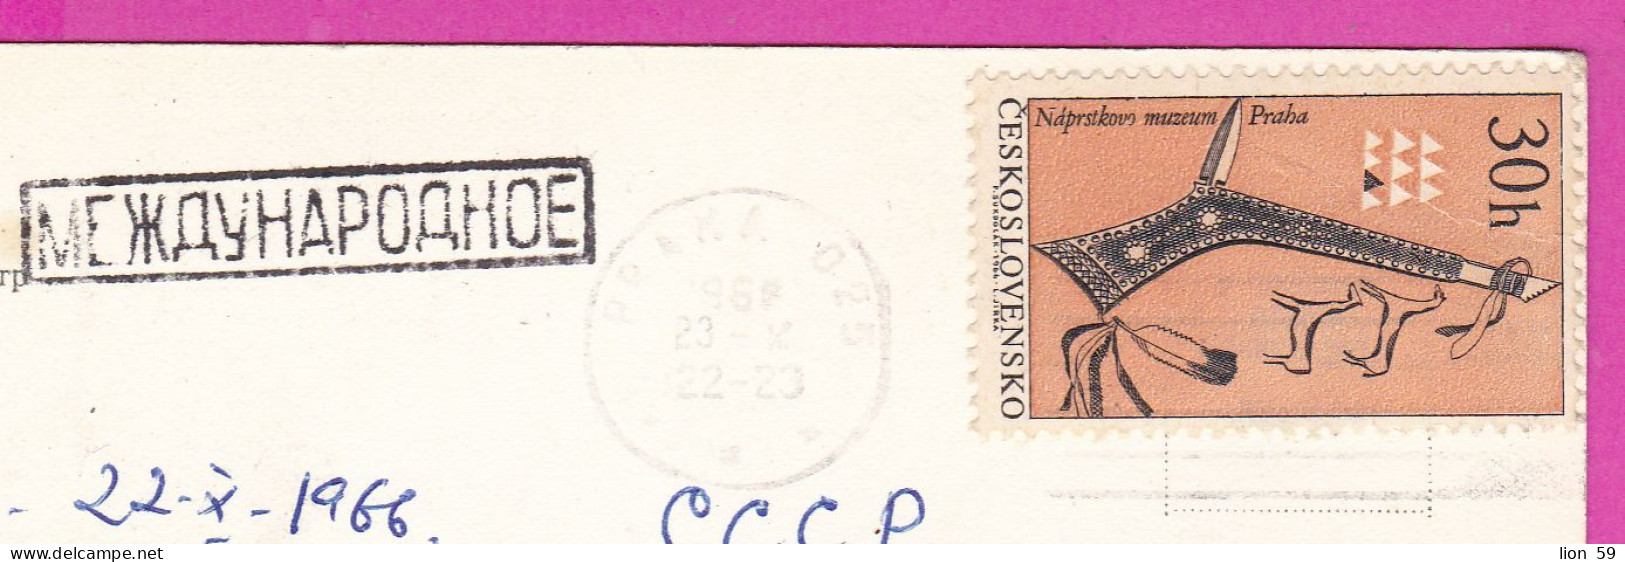 294803 / Czechoslovakia PRAHA National Theatre Building PC 1966 USED 30h - North American Indians Museum Tomahawk - Covers & Documents